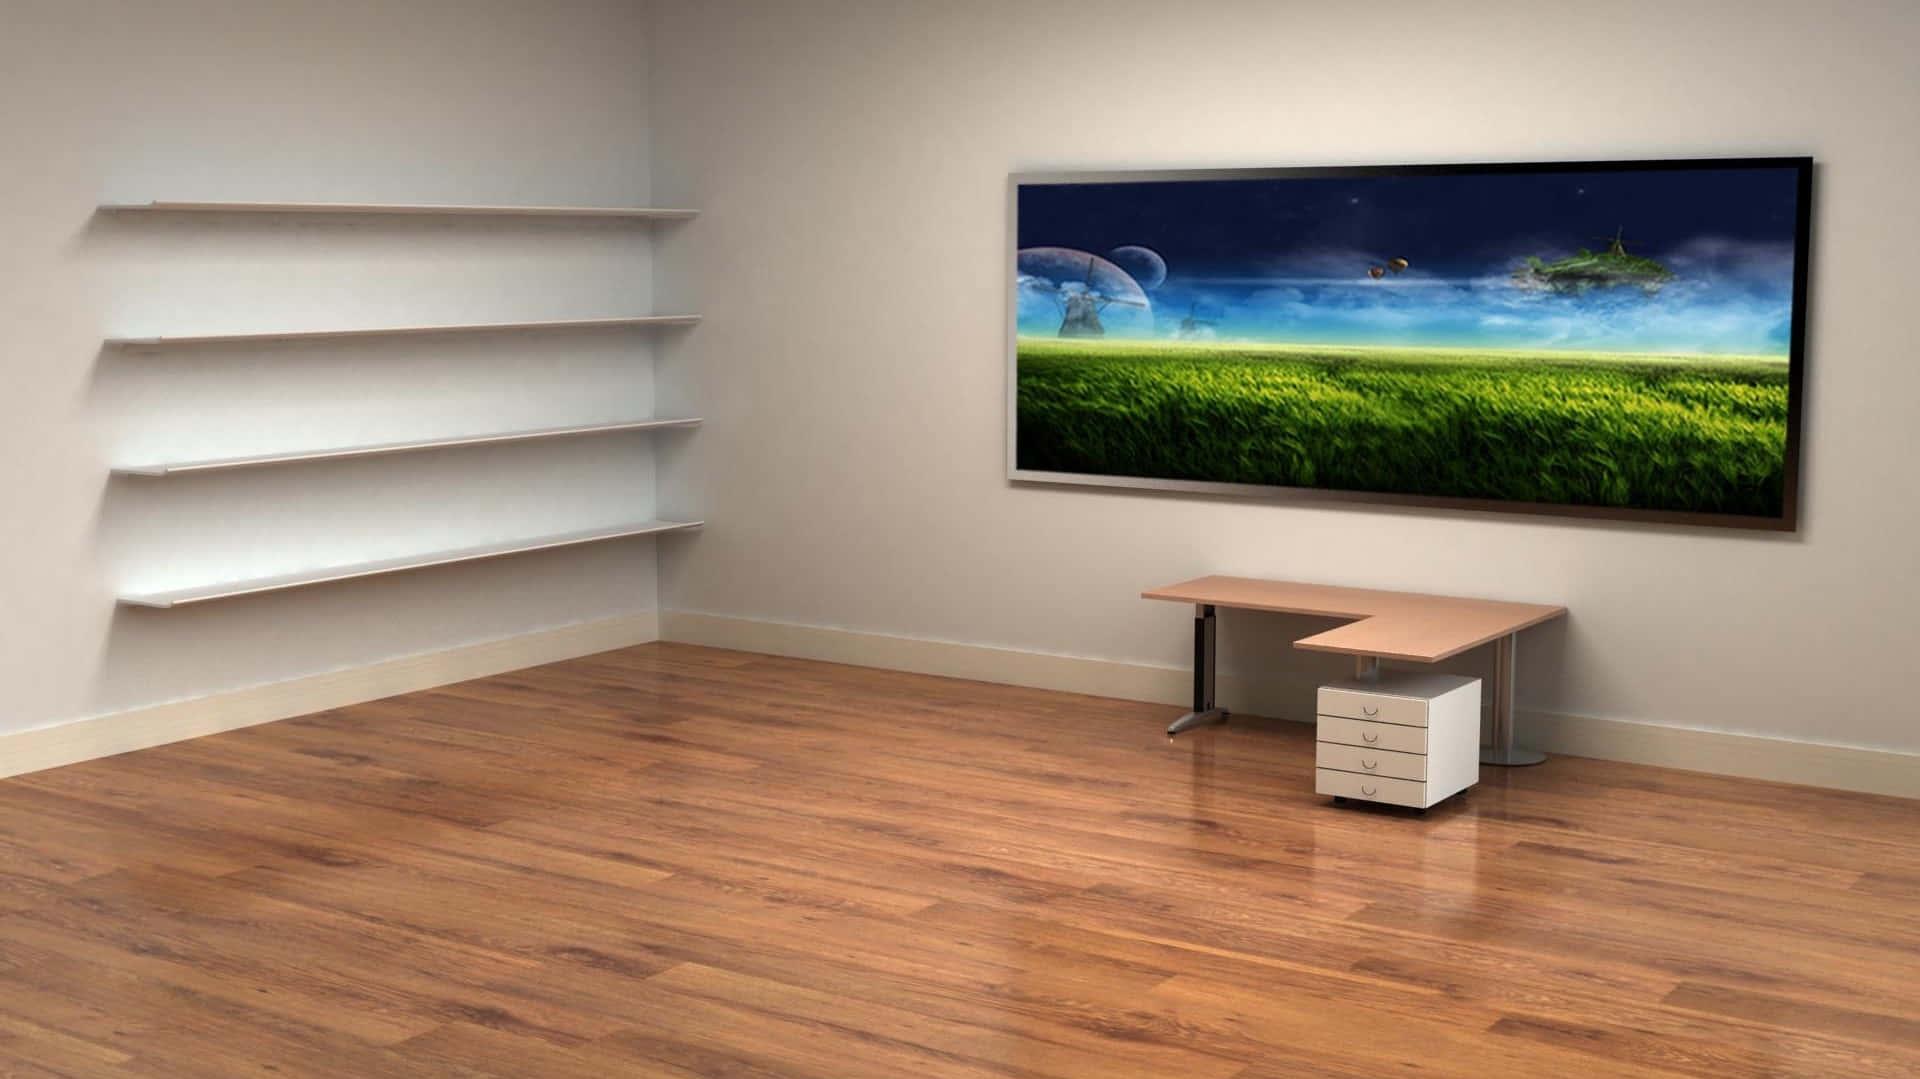 A Room With Tv And Shelves Wallpaper